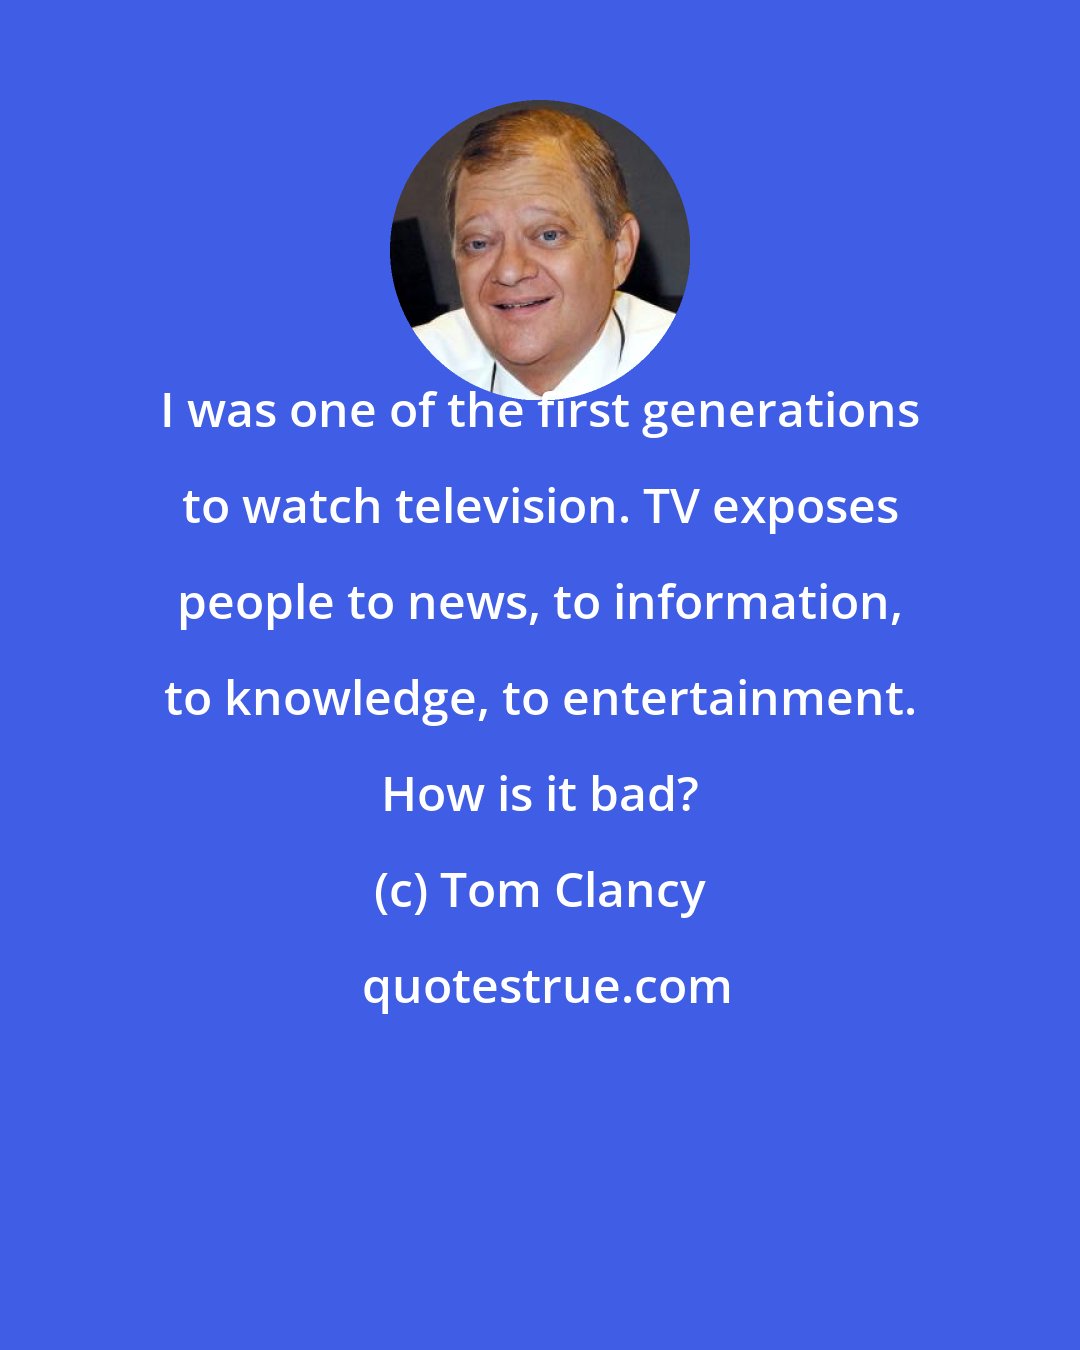 Tom Clancy: I was one of the first generations to watch television. TV exposes people to news, to information, to knowledge, to entertainment. How is it bad?